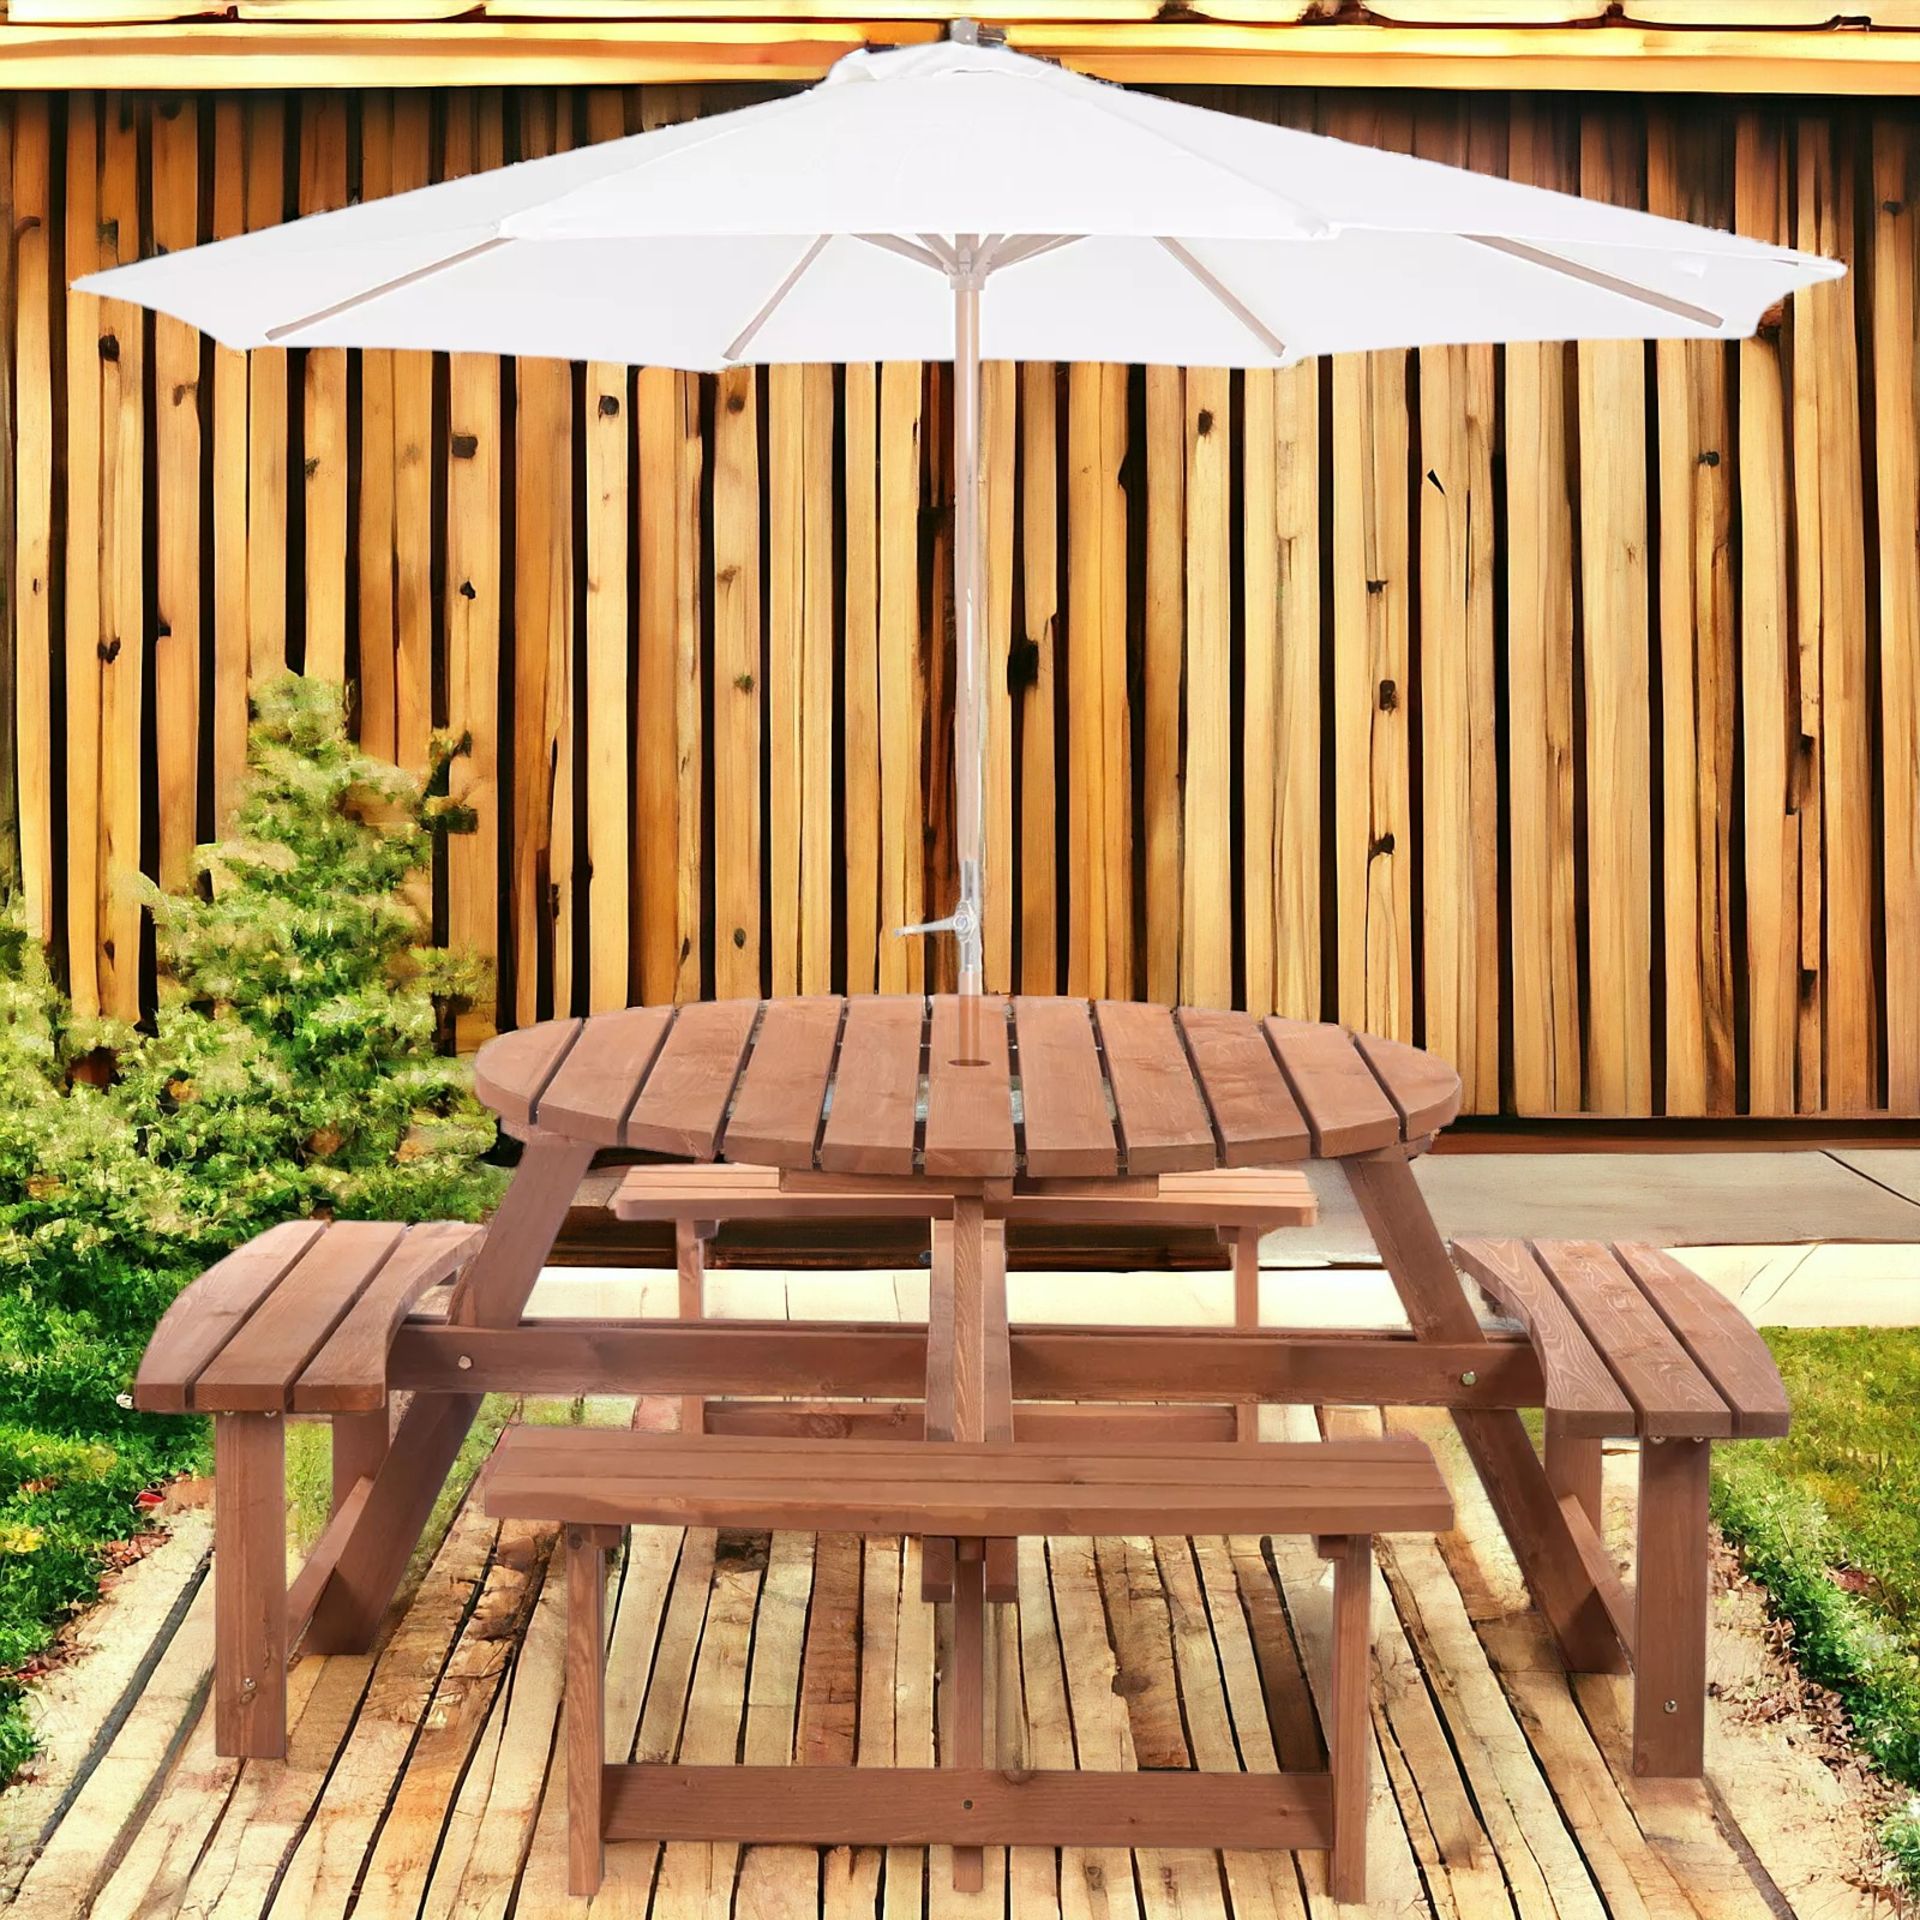 FREE DELIVERY- BRAND NEW 8 SEAT GARDEN OUTDOOR WOODEN ROUND PICNIC TABLE BENCH - Bild 2 aus 2